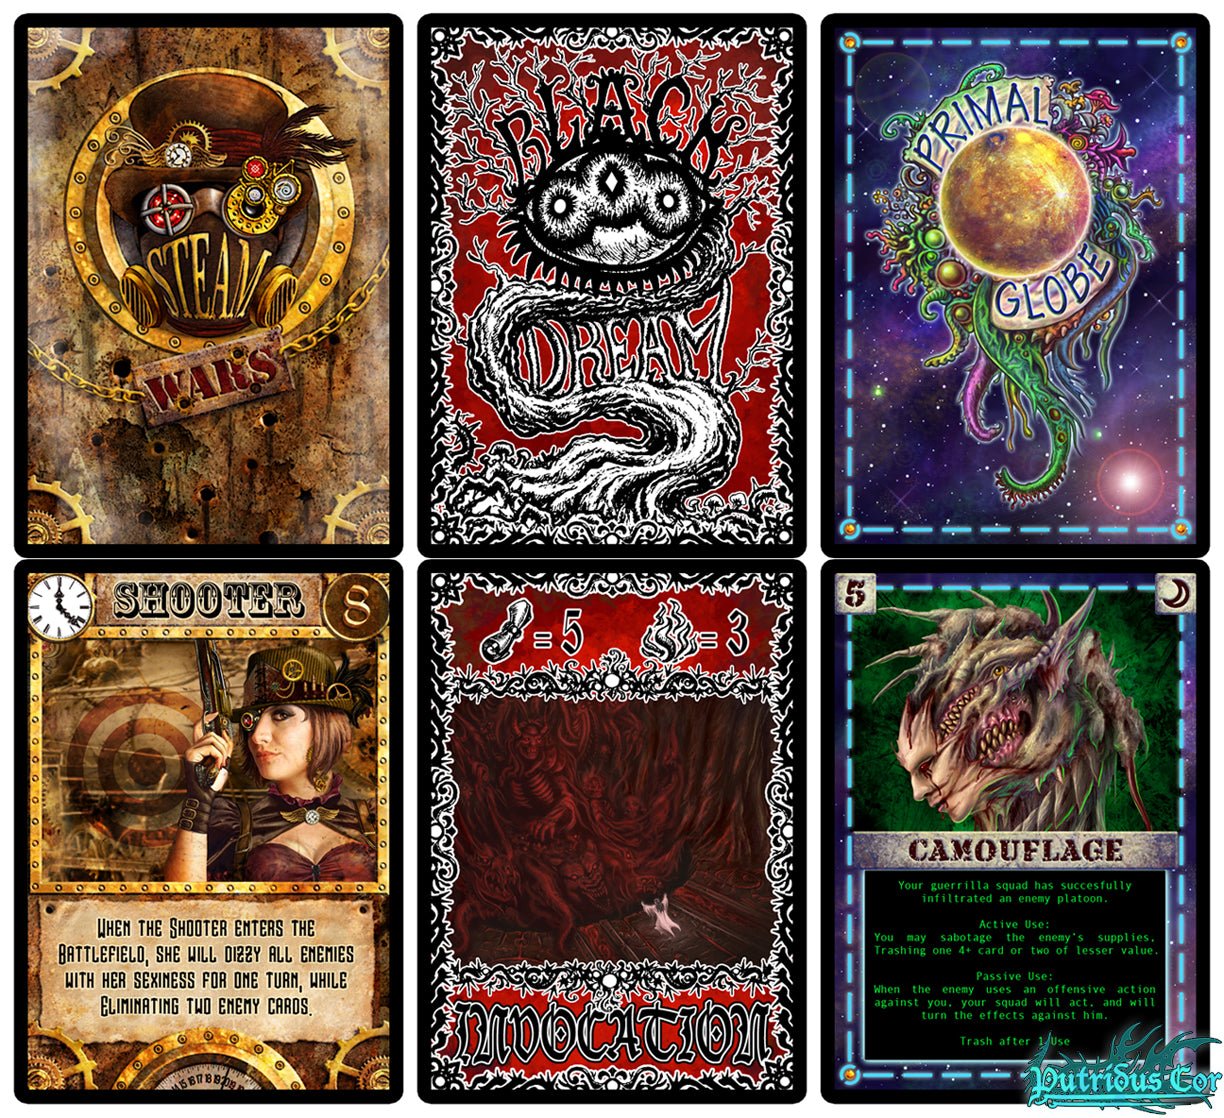 Custom Playing Card Art, Fantasy Packaging design, and board game Illustration. Graphic Artist services - Abysm Internal